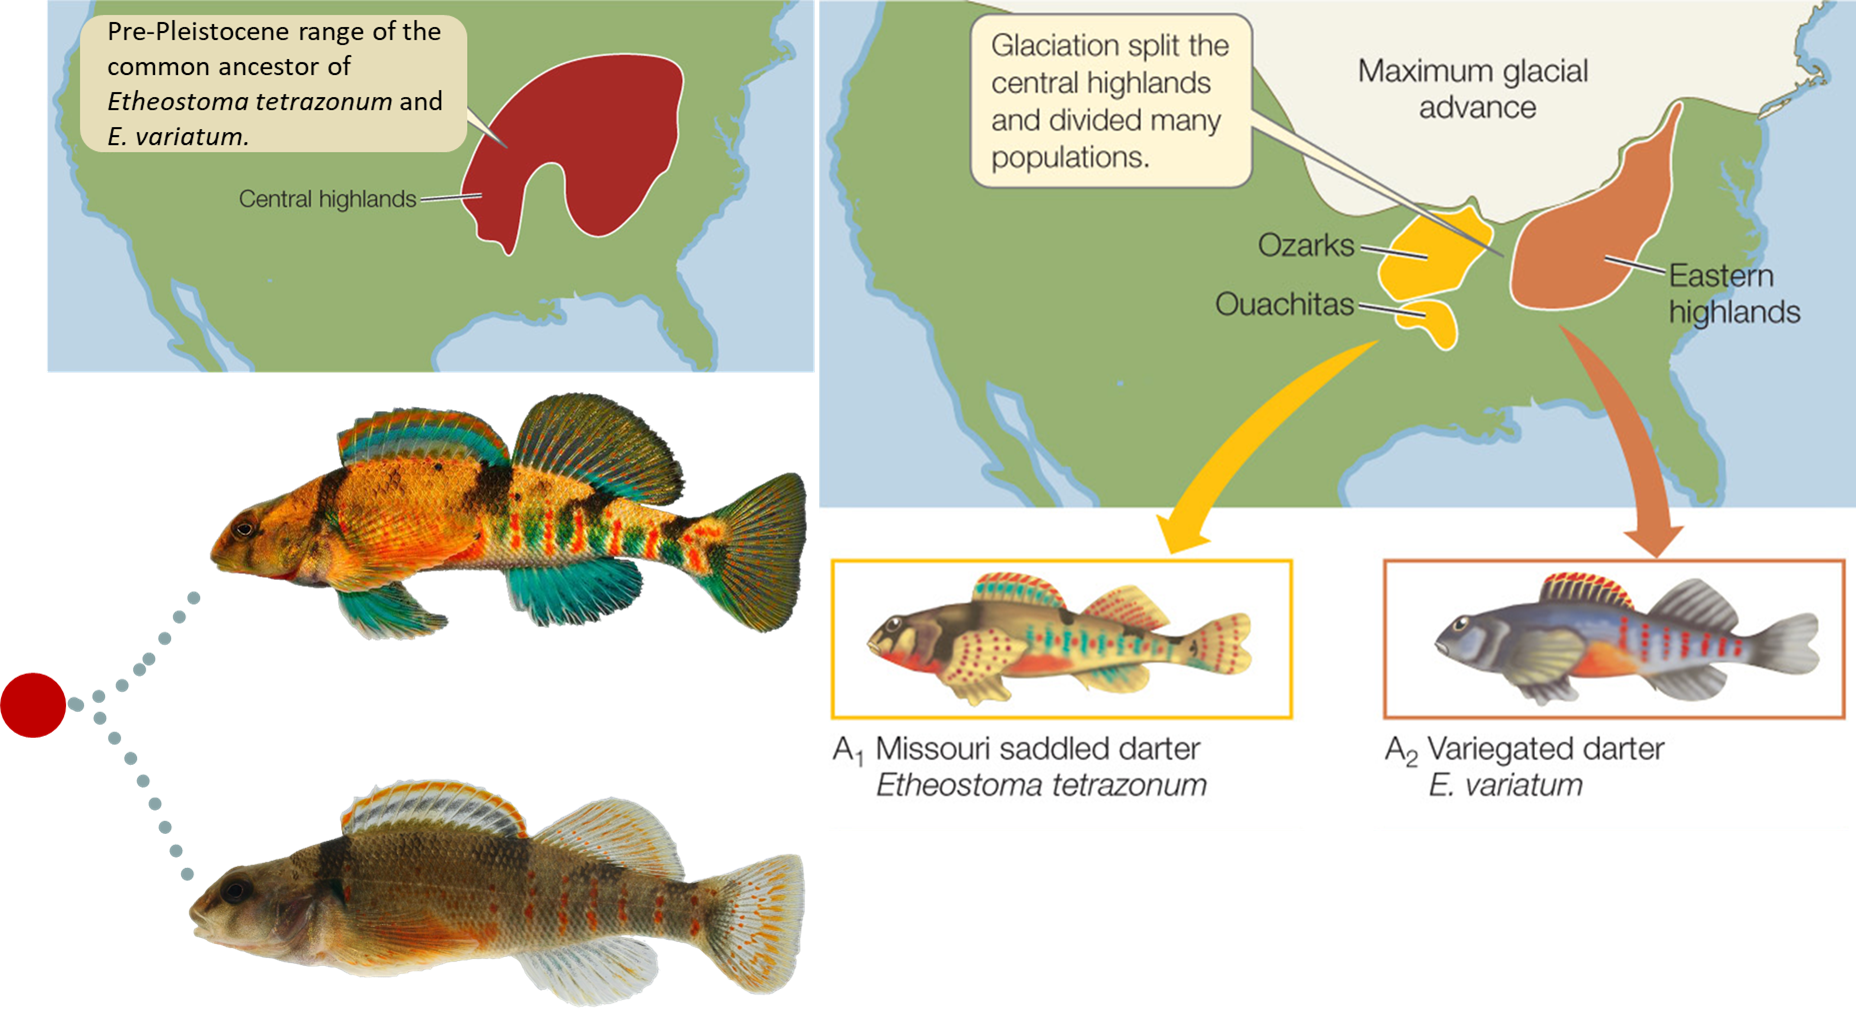 <p>The Missouri saddled darter Etheostoma tetrazonum and the variegated darter Etheostoma variatum share a common ancestor. Their once shared genetic lineage diverged during the Pleistocene when their respective sublineages became isolated by an advancing glacier. _____________ speciation occurred following this _________________ event. a. allopatric, stabilizing selection b. sympatric, vicariance c. allopatric, vicariance d. allopatric, mutation e. sympatric, stabilizing selection</p>